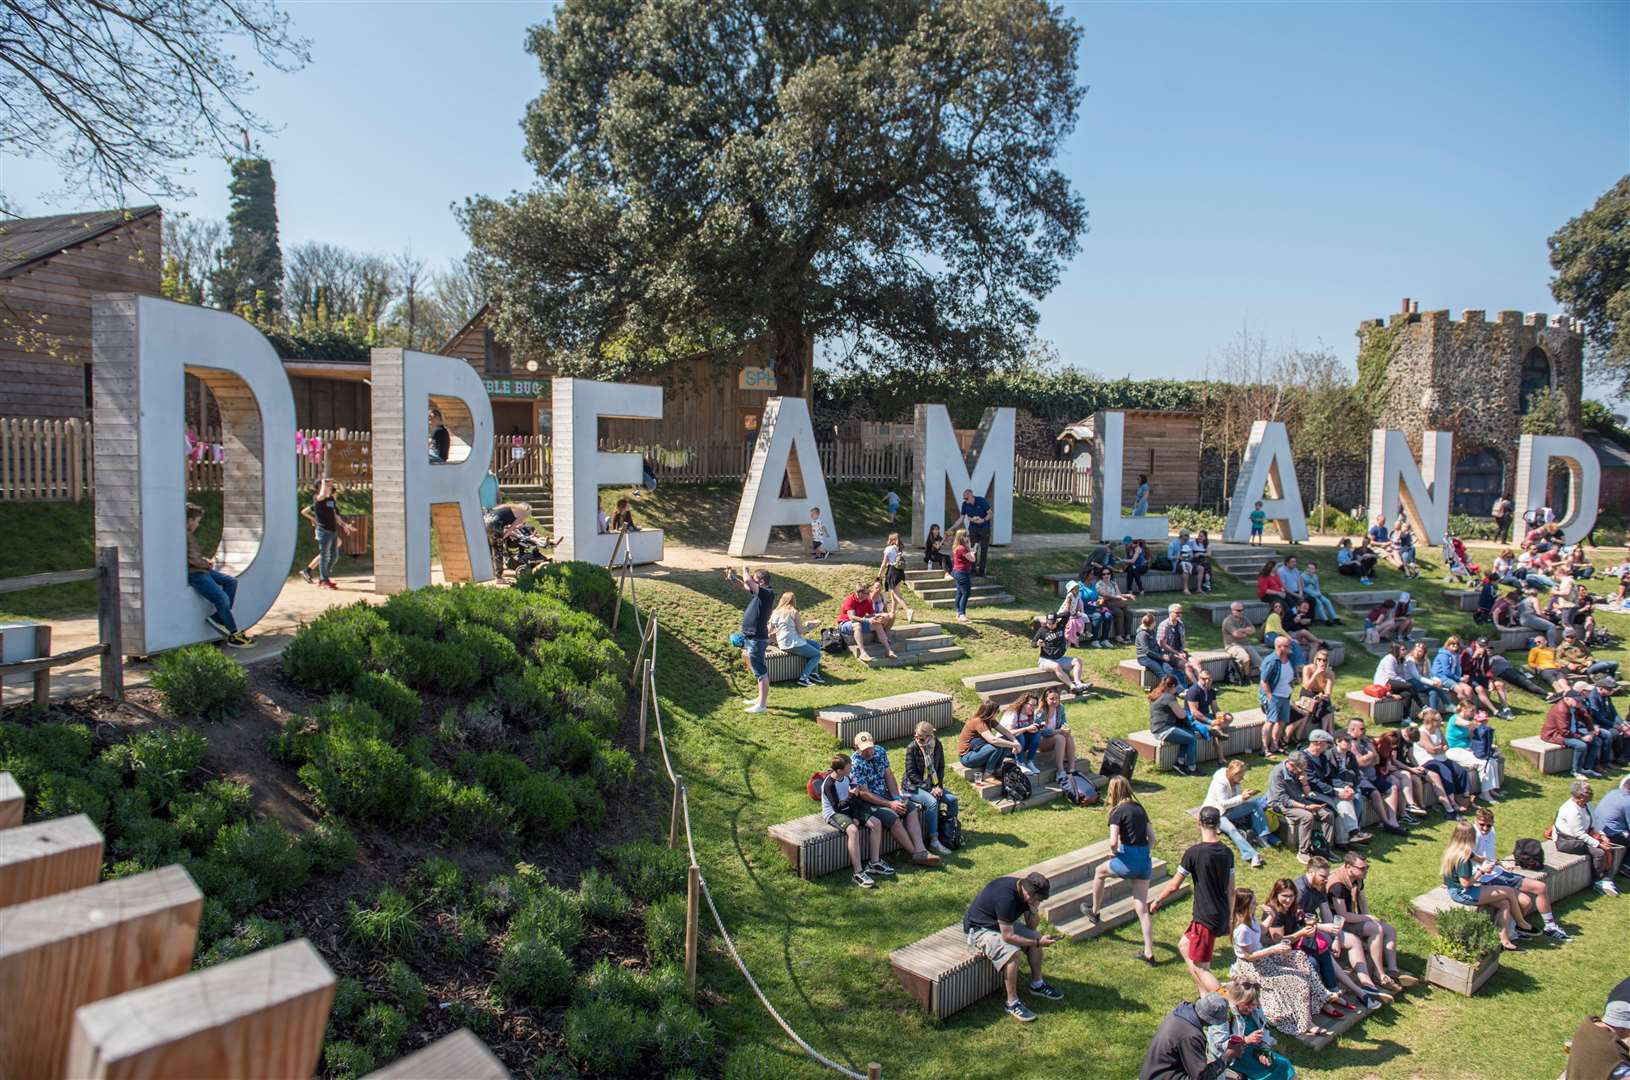 Dreamland opened as a vintage theme park – but has repositioned itself as Kent’s leading live music venue for big outdoor shows